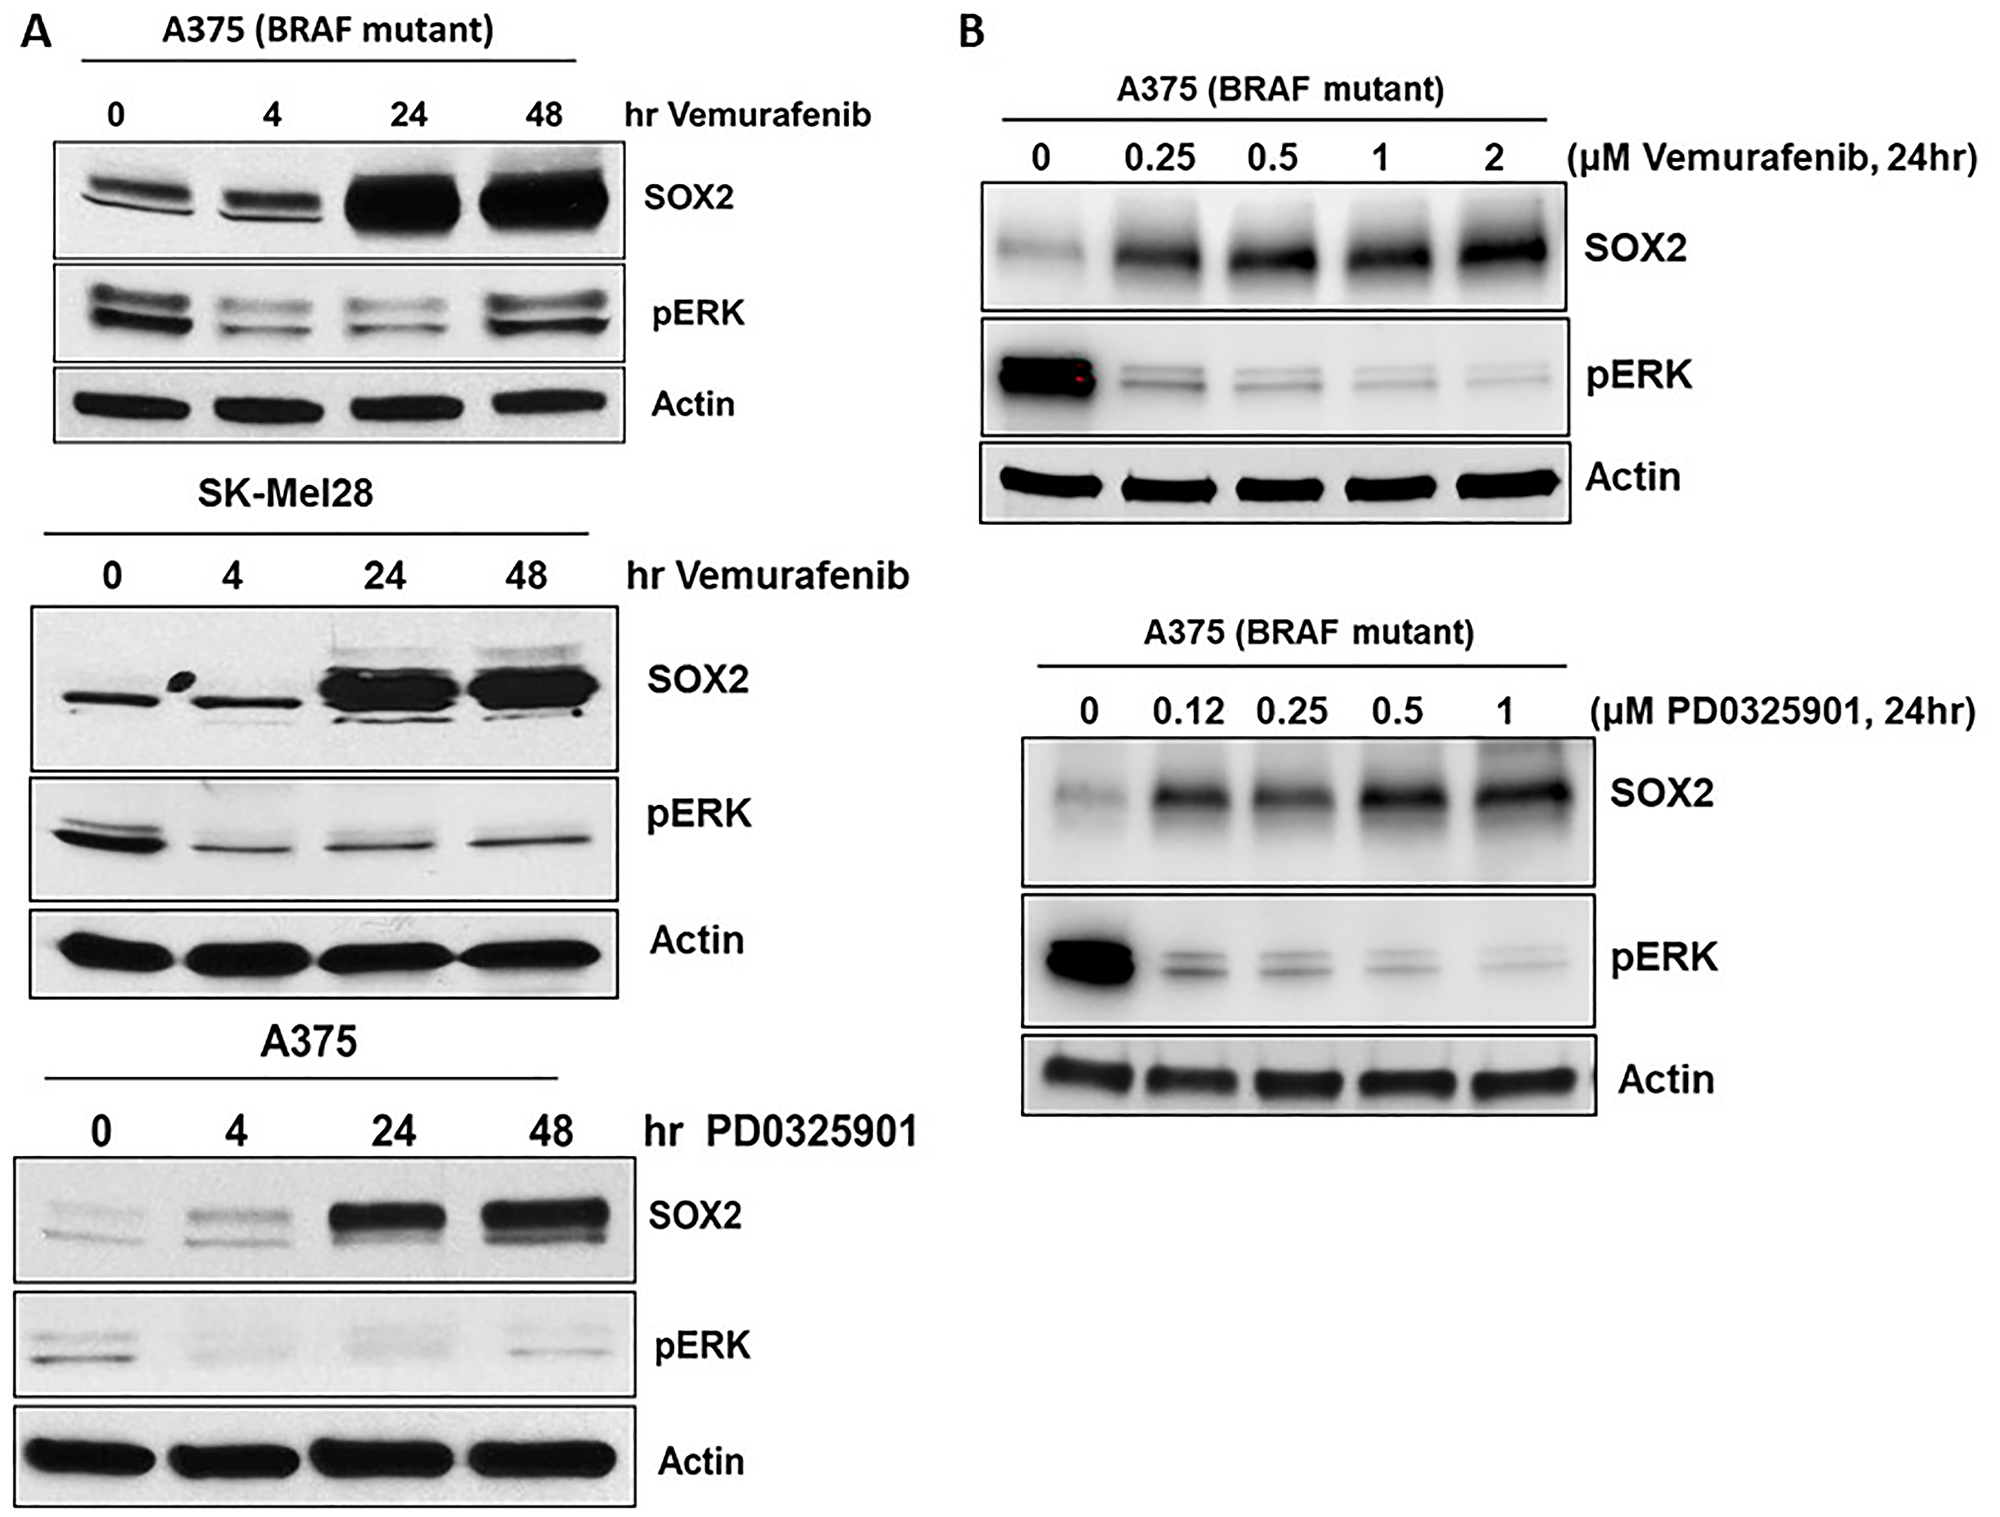 SOX2 expression is induced by BRAF and MEK inhibitors.